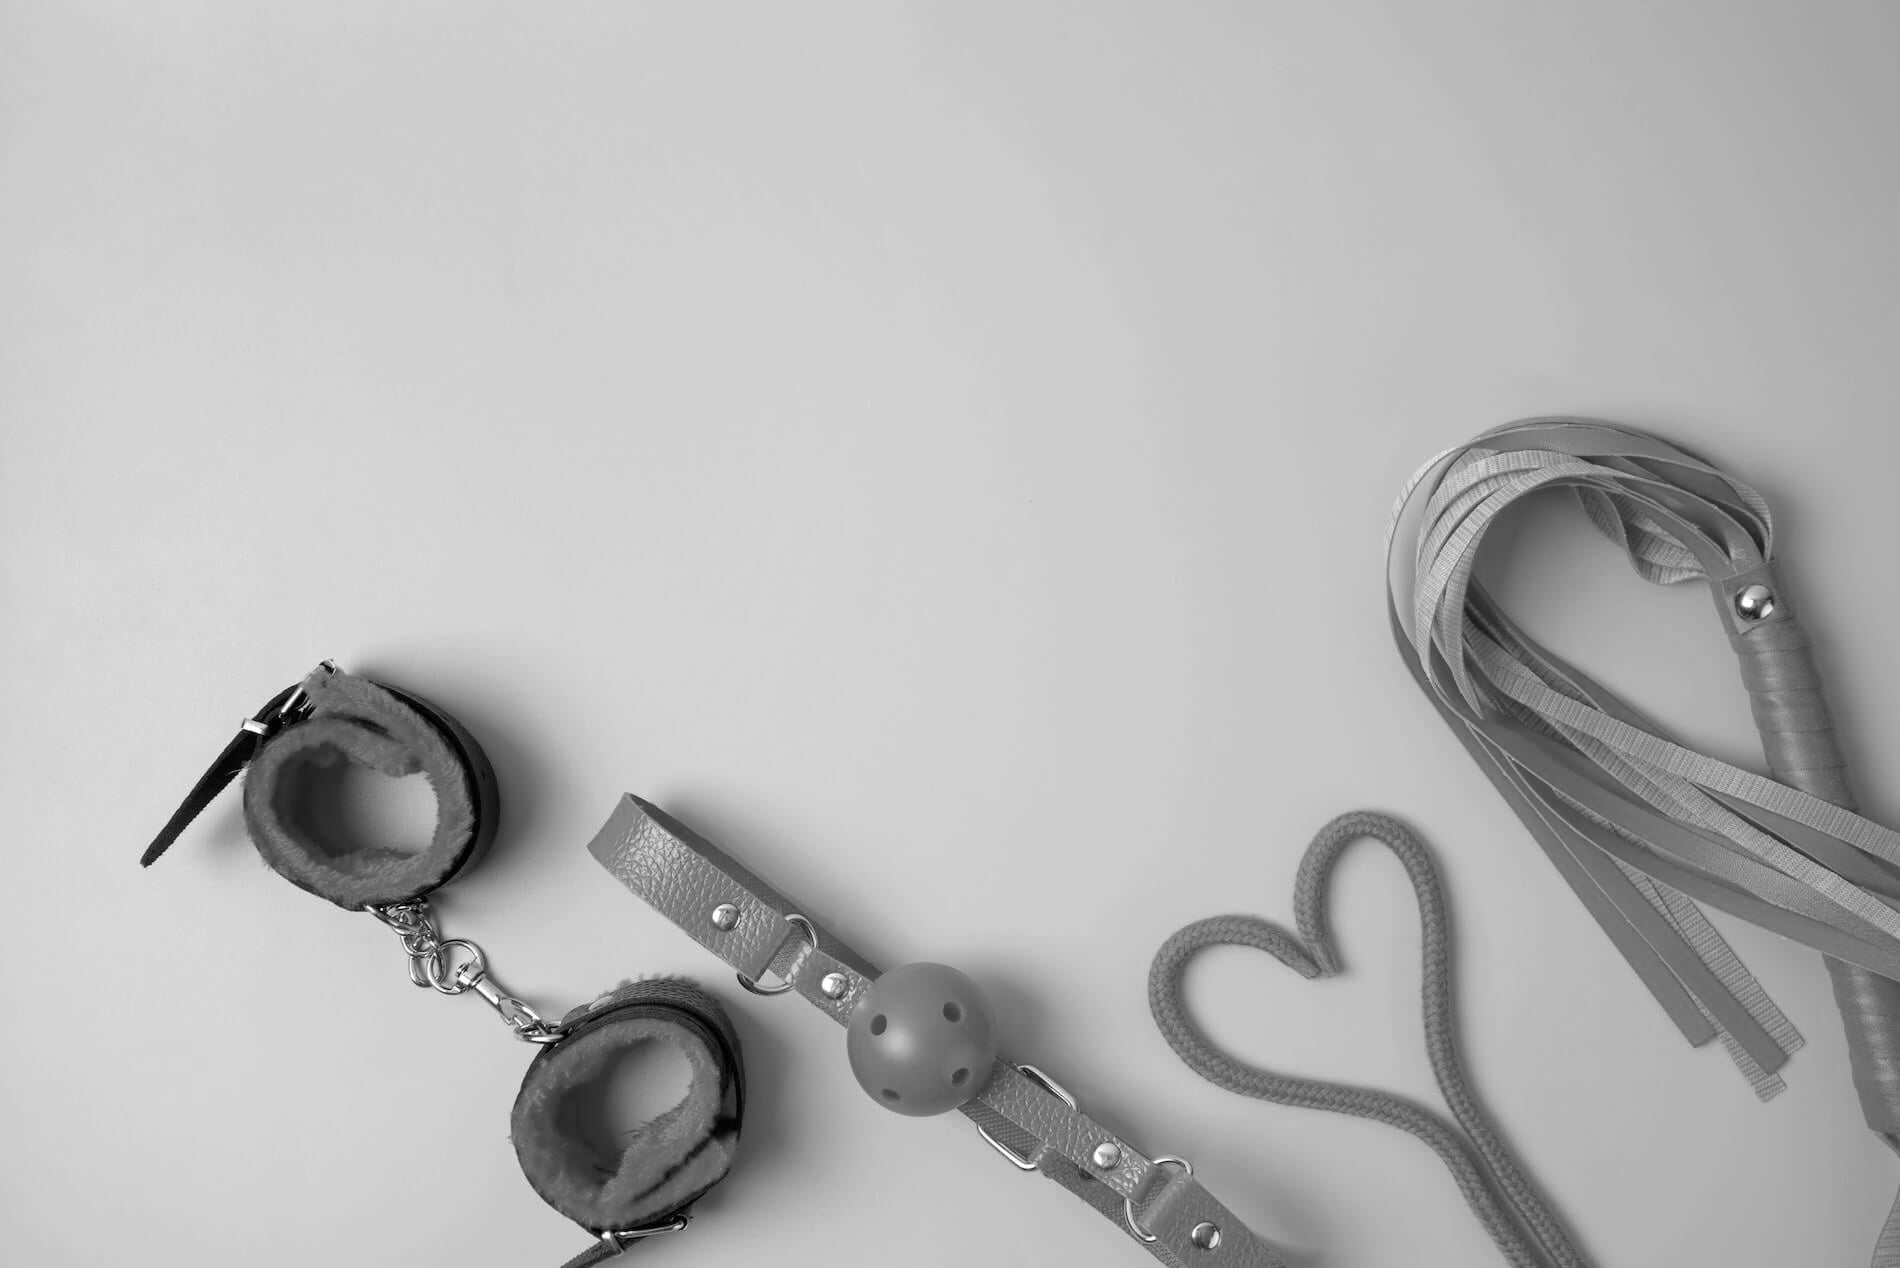 Leather handcuffs and leather bondage gear on a light background